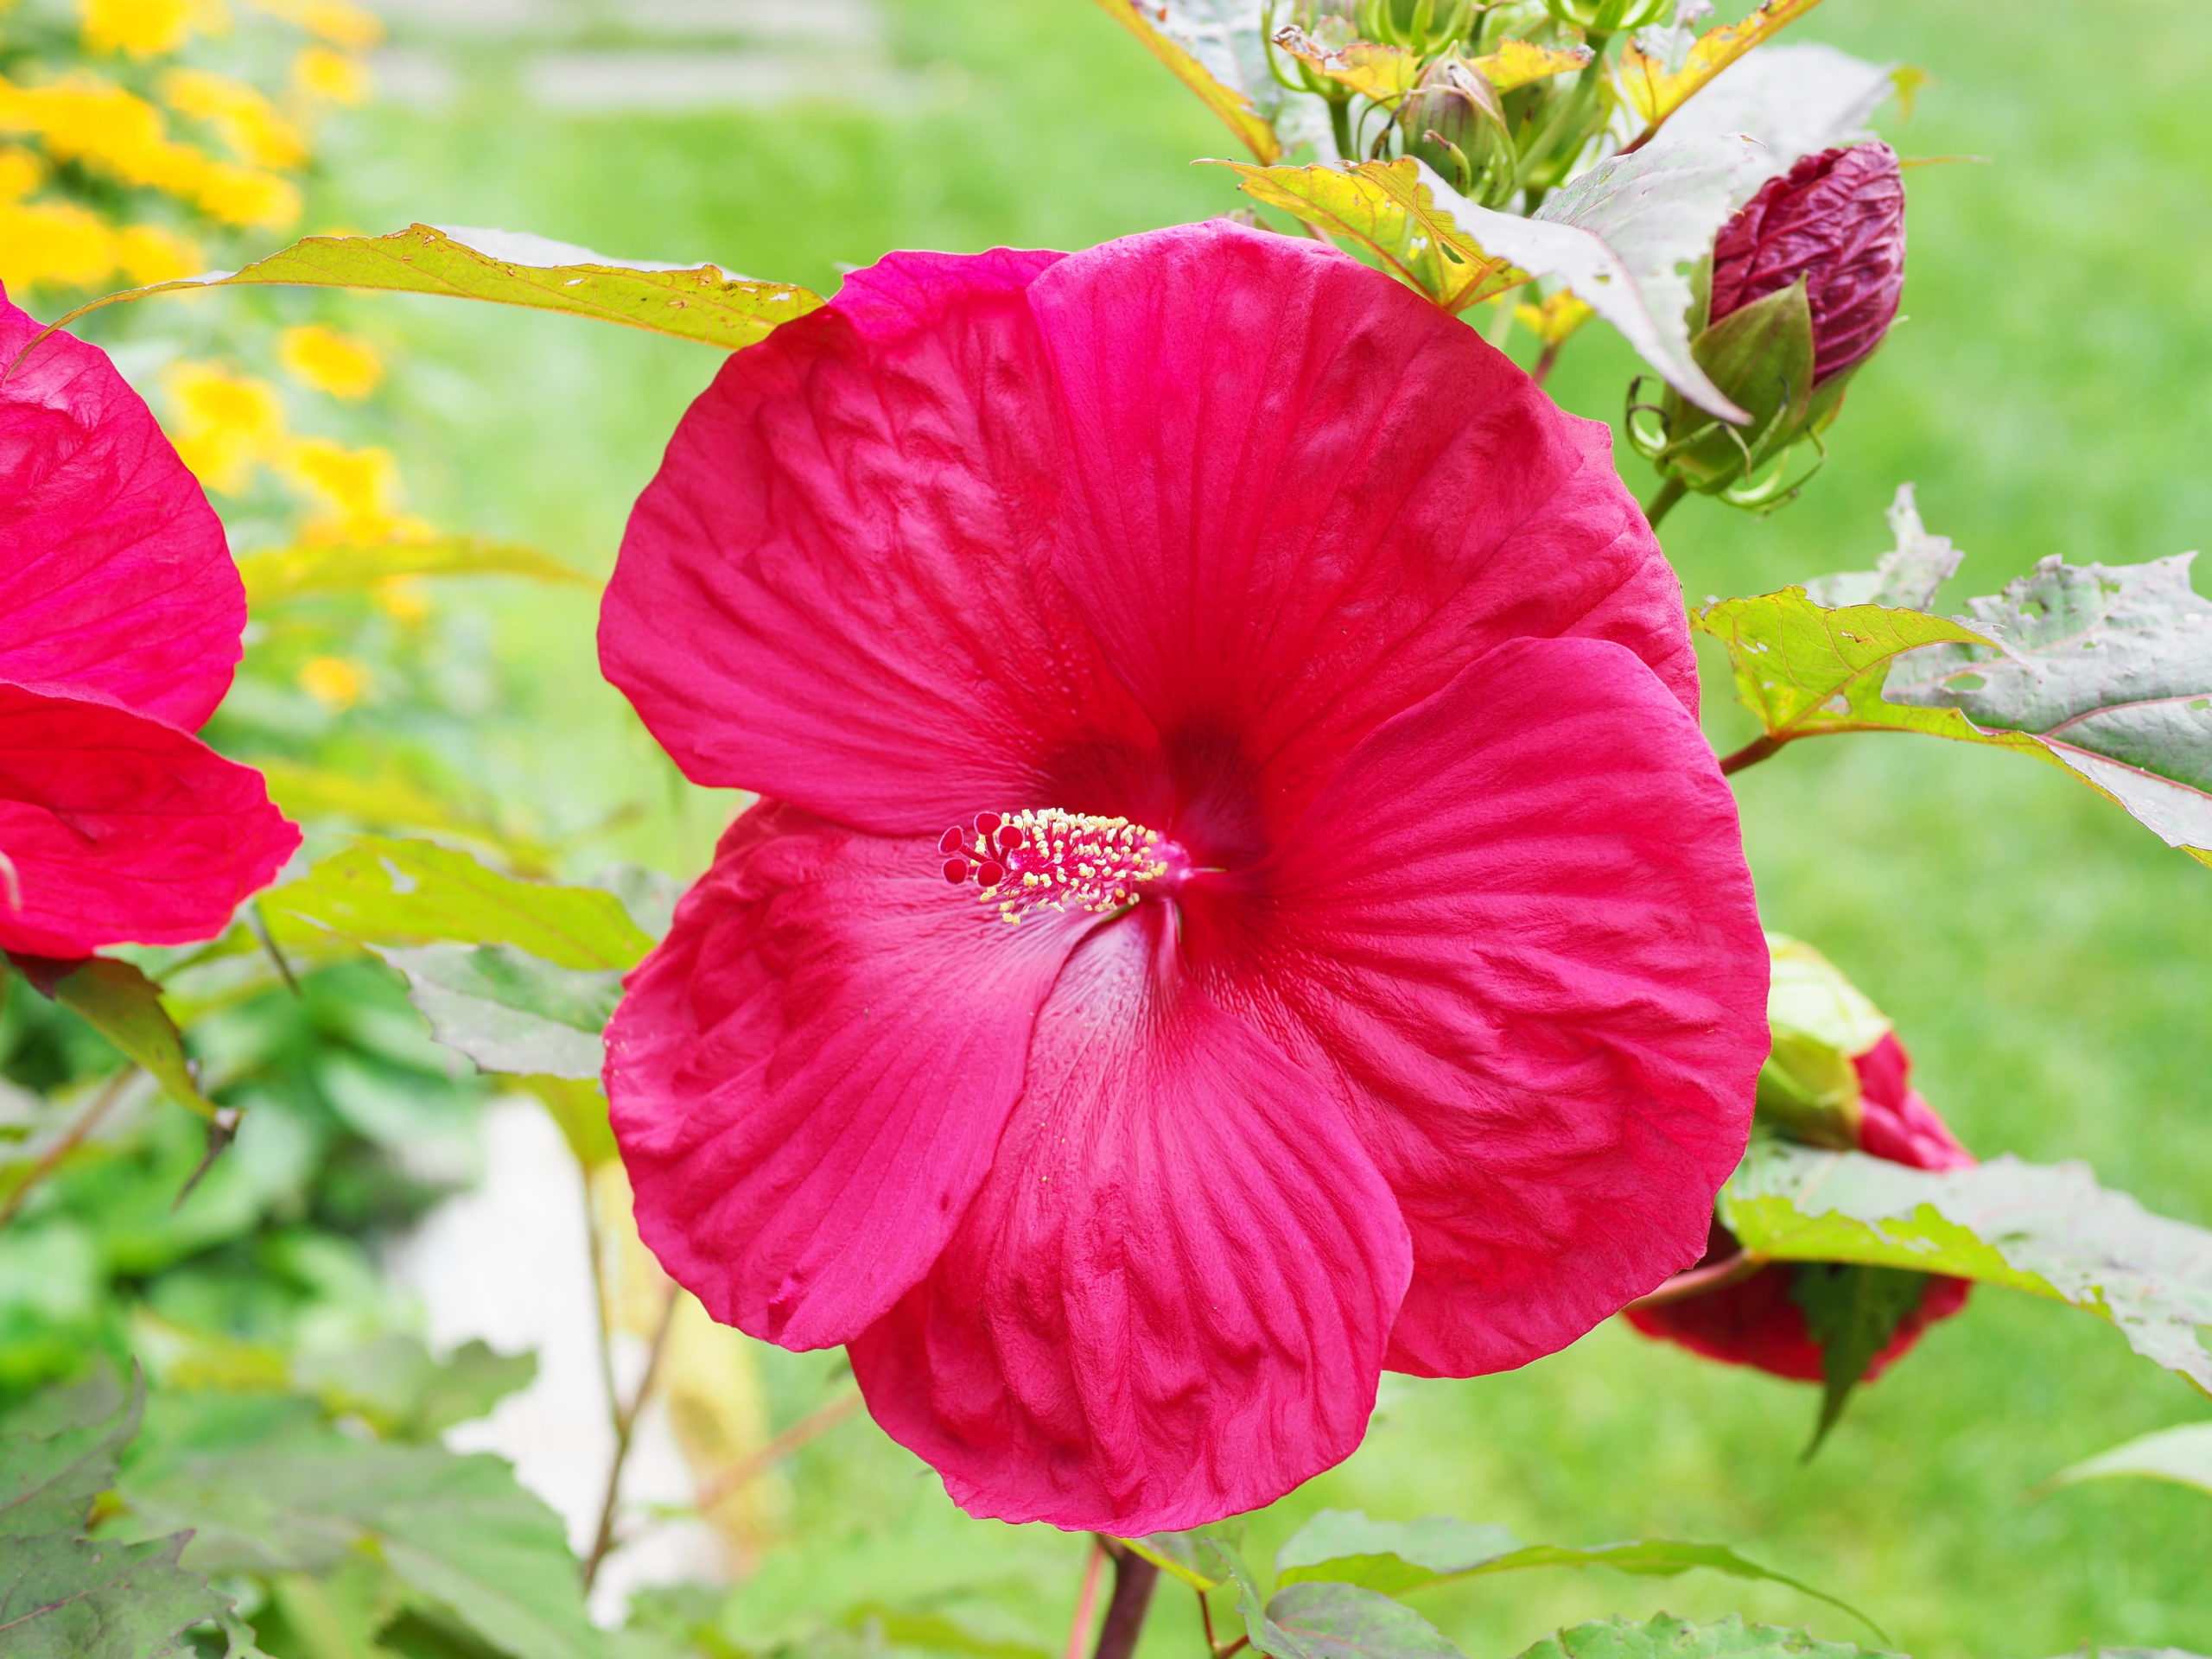 This deep red Hibiscus has a wonderful 8-inch flower with an oxblood red throat, but the plant’s habit is open and not very attractive unless used as a tall background planting. It has no name tag, but it is one that seems to be a Japanese beetle magnet.